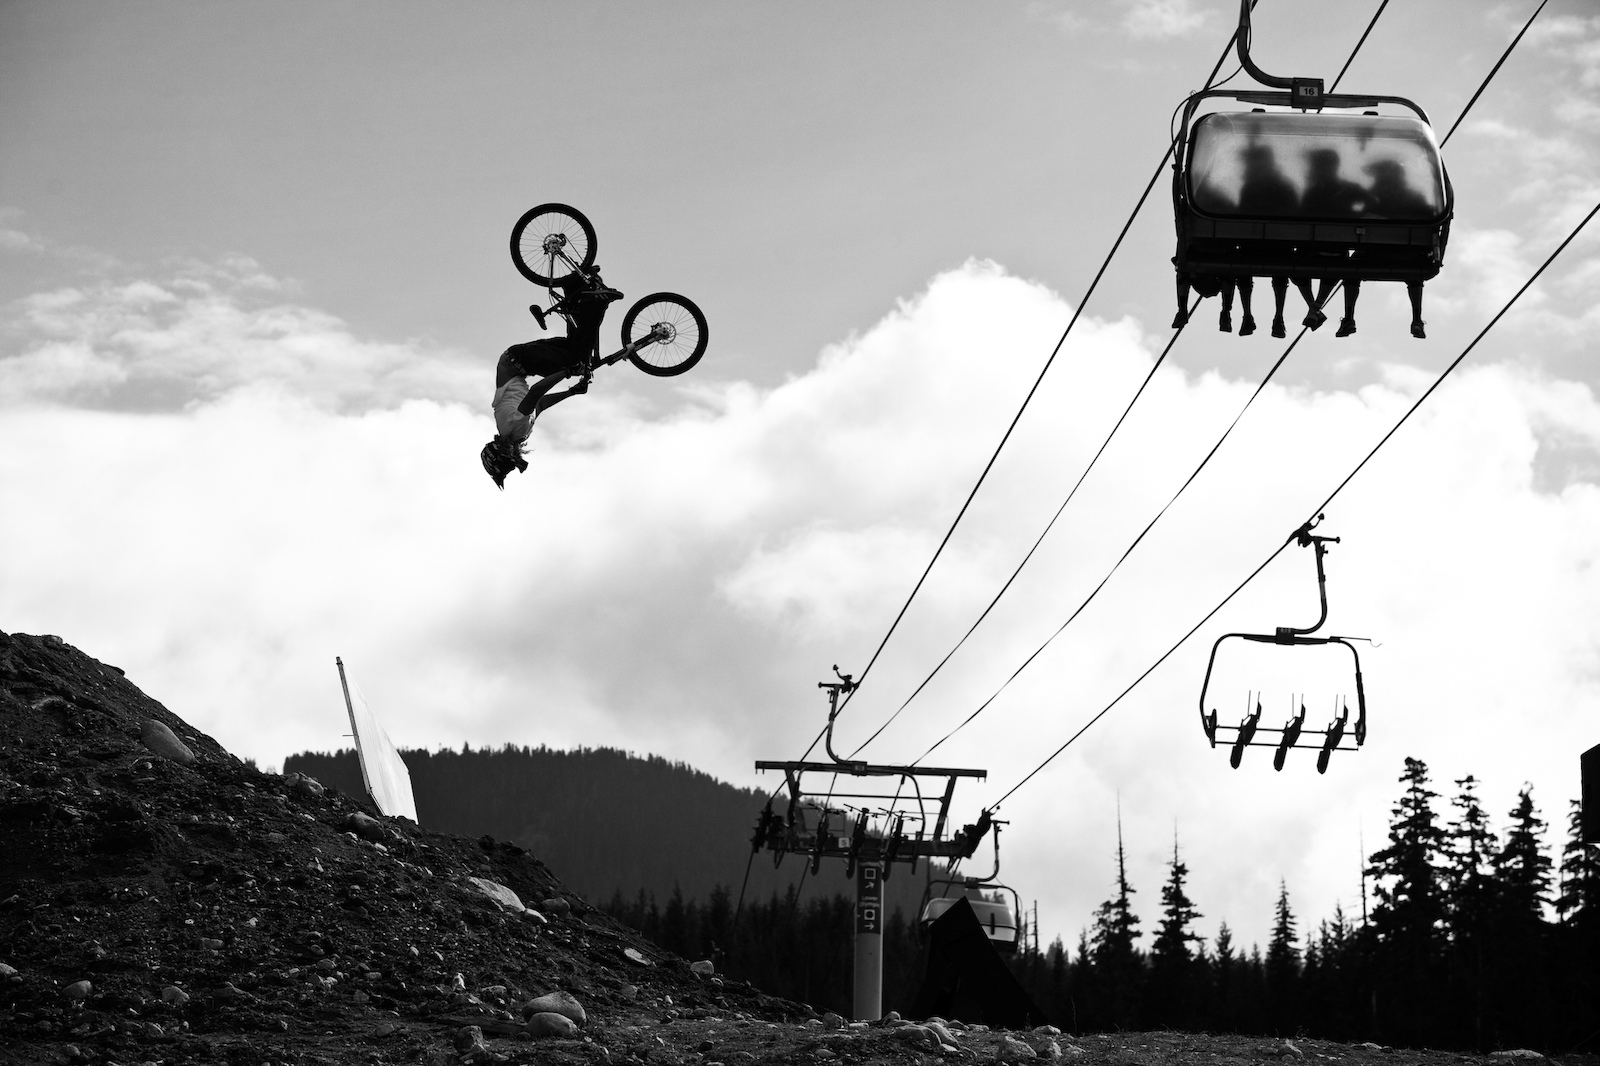 Kelly McGarry backflips his mountain bike during the finals of freeride competition Crankworx Whistler BC. Photo Dan Barham